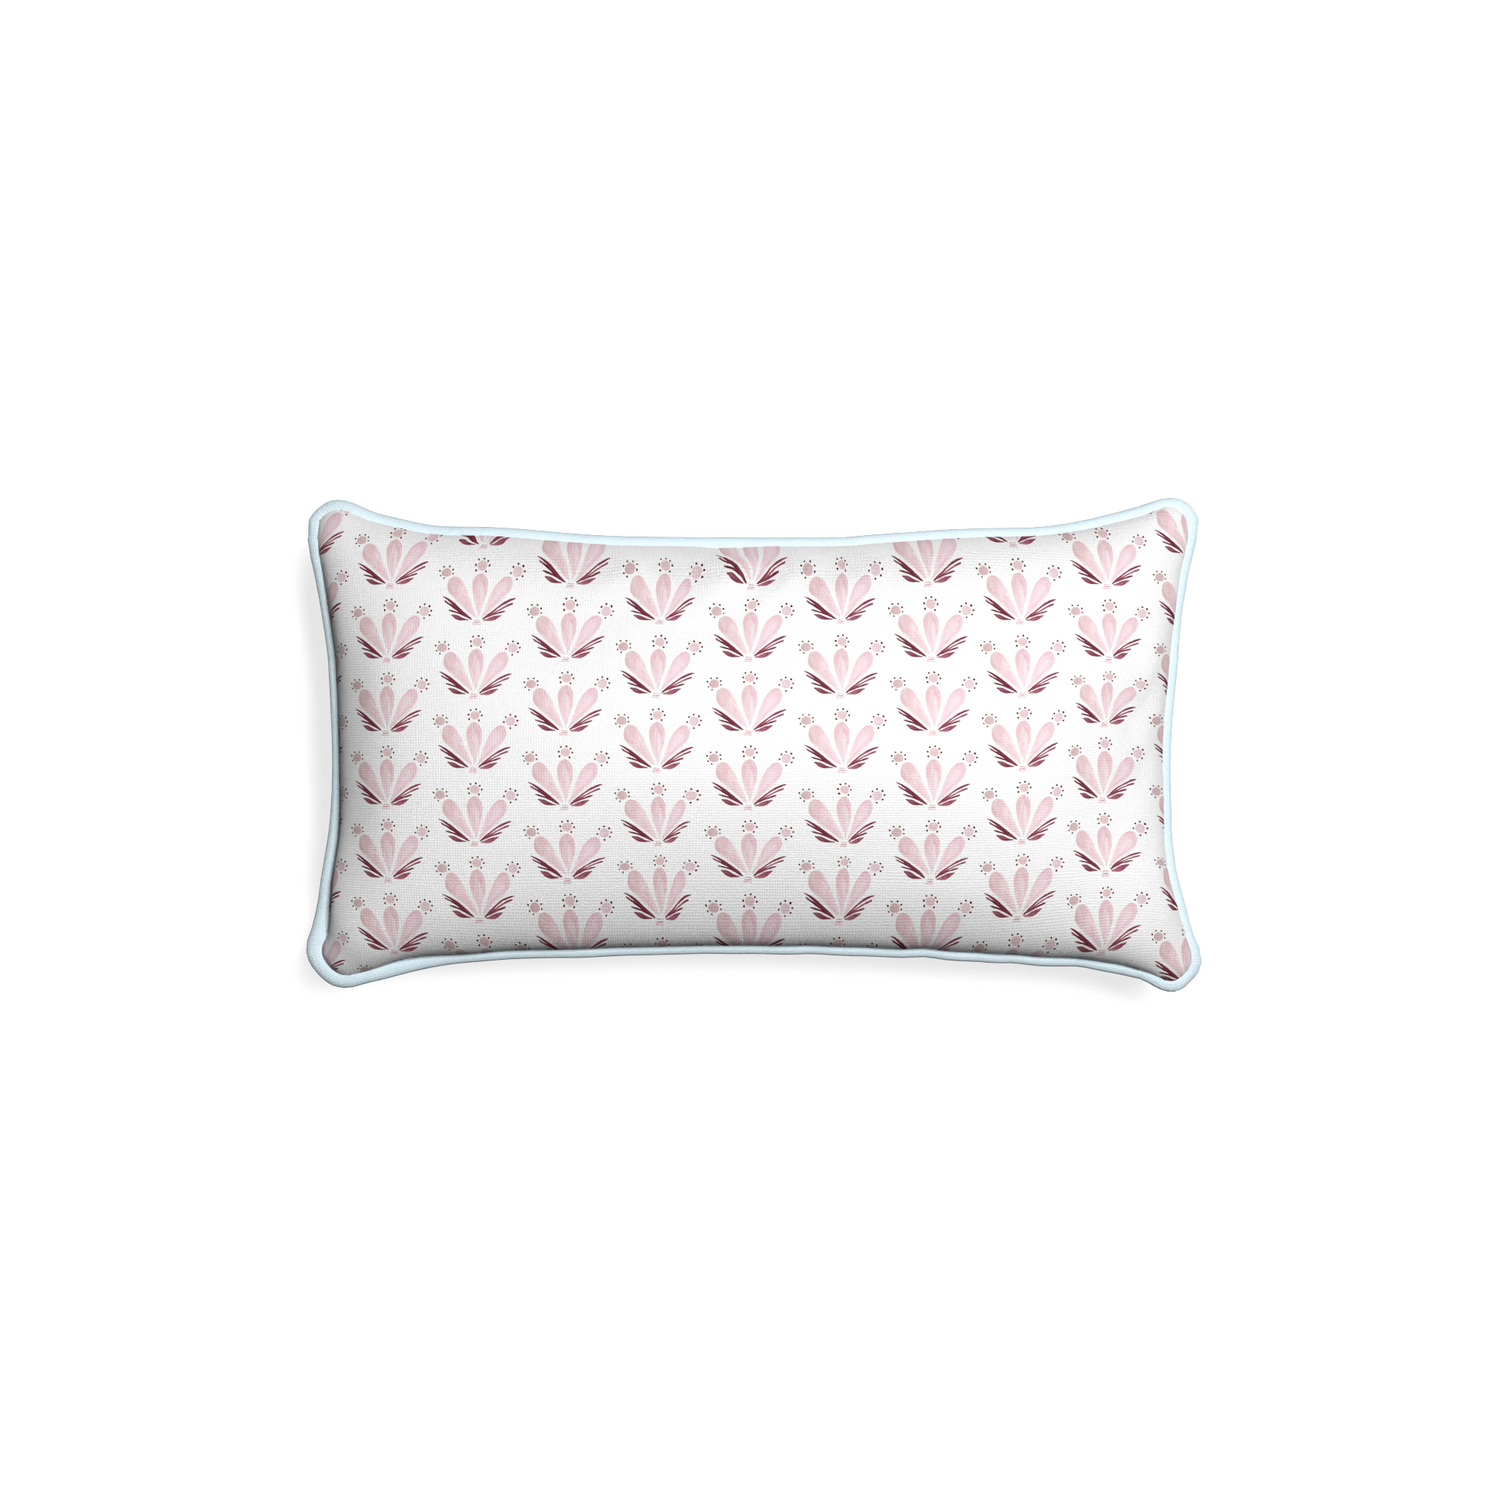 Petite-lumbar serena pink custom pink & burgundy drop repeat floralpillow with powder piping on white background